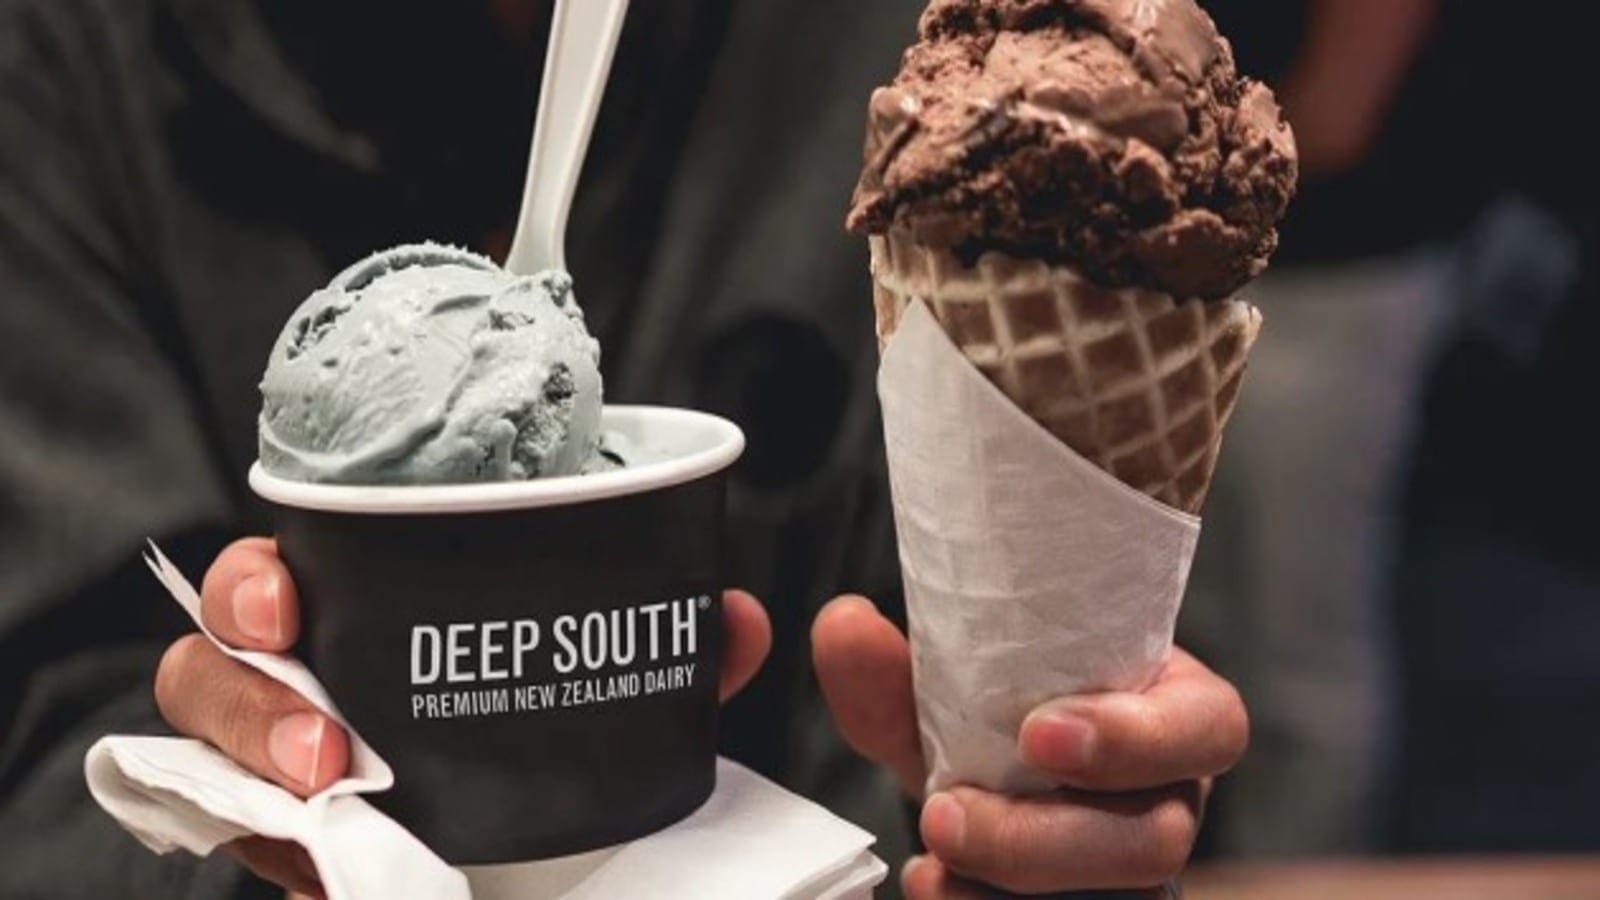 Dairyworks divests its ice cream brand portfolio to focus on its cheese business